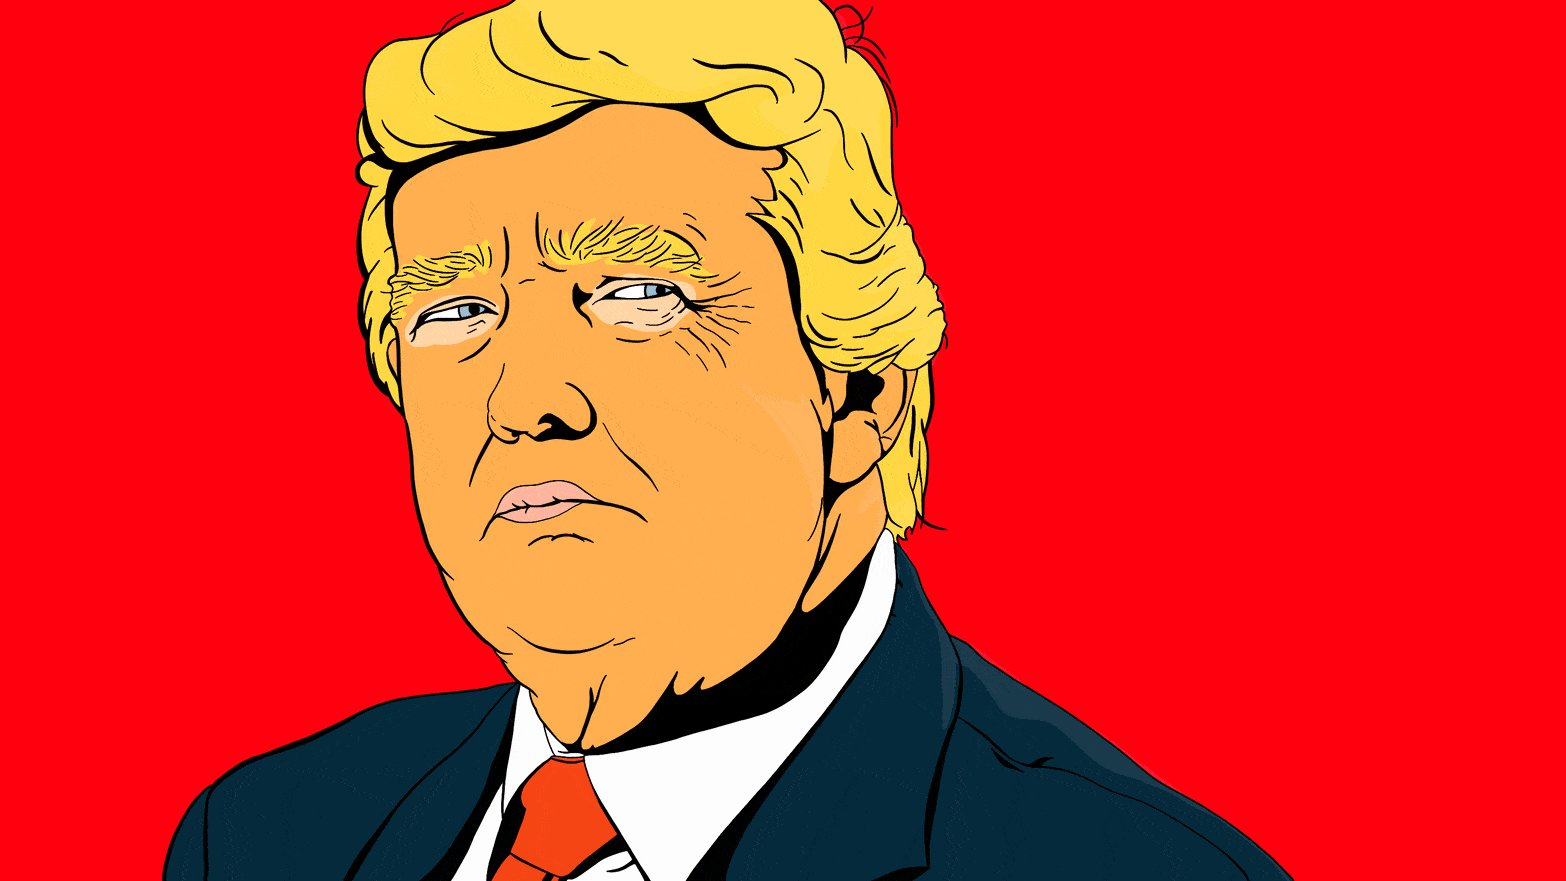 Illustrated gif of Donald Trump with his eyes going side to side.